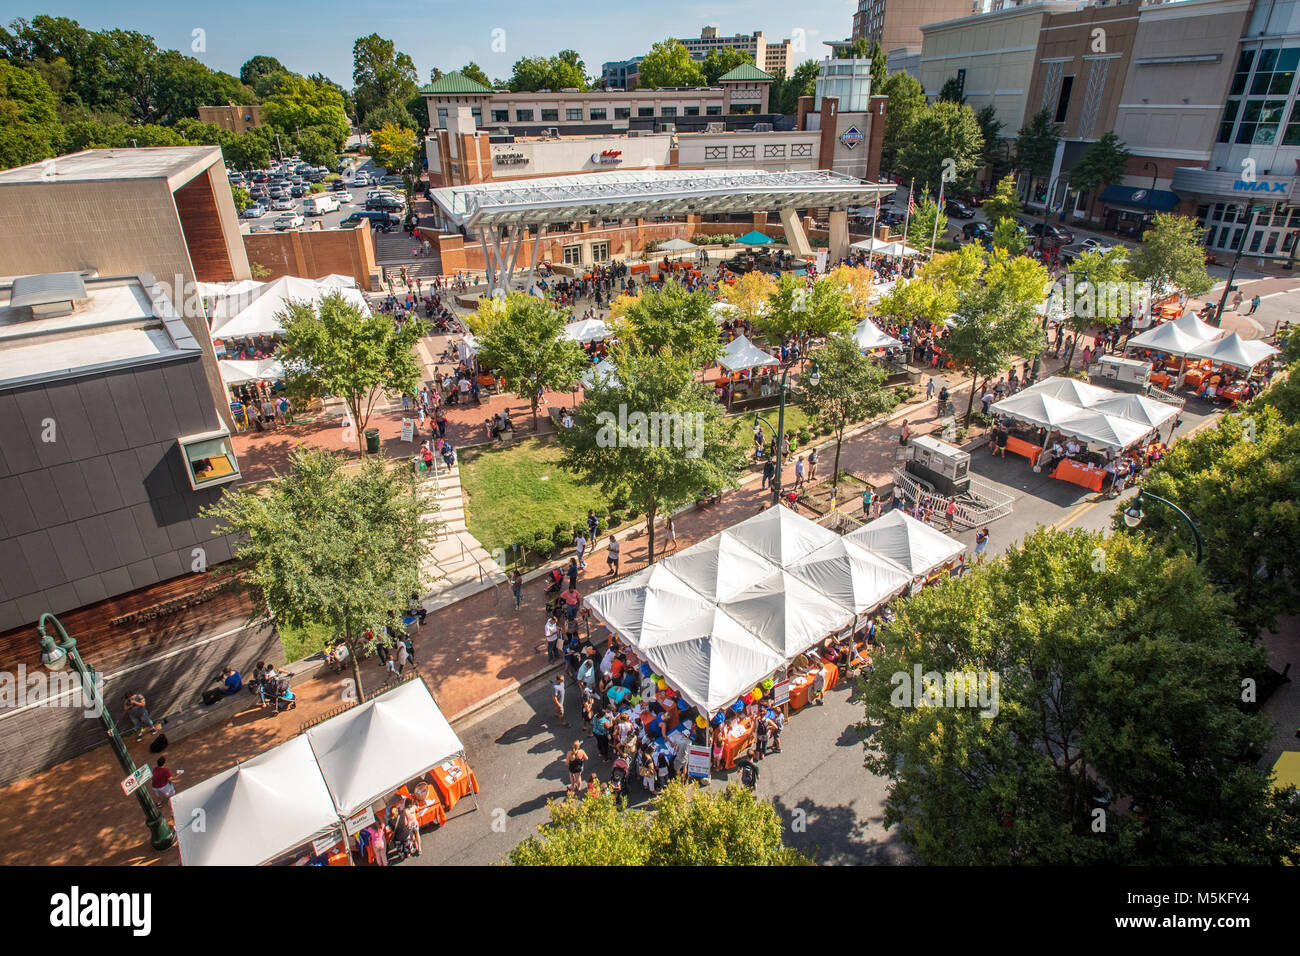 Overlooking crowded street festival with pop up tents at civic building in Silver Spring, Maryland Stock Photo